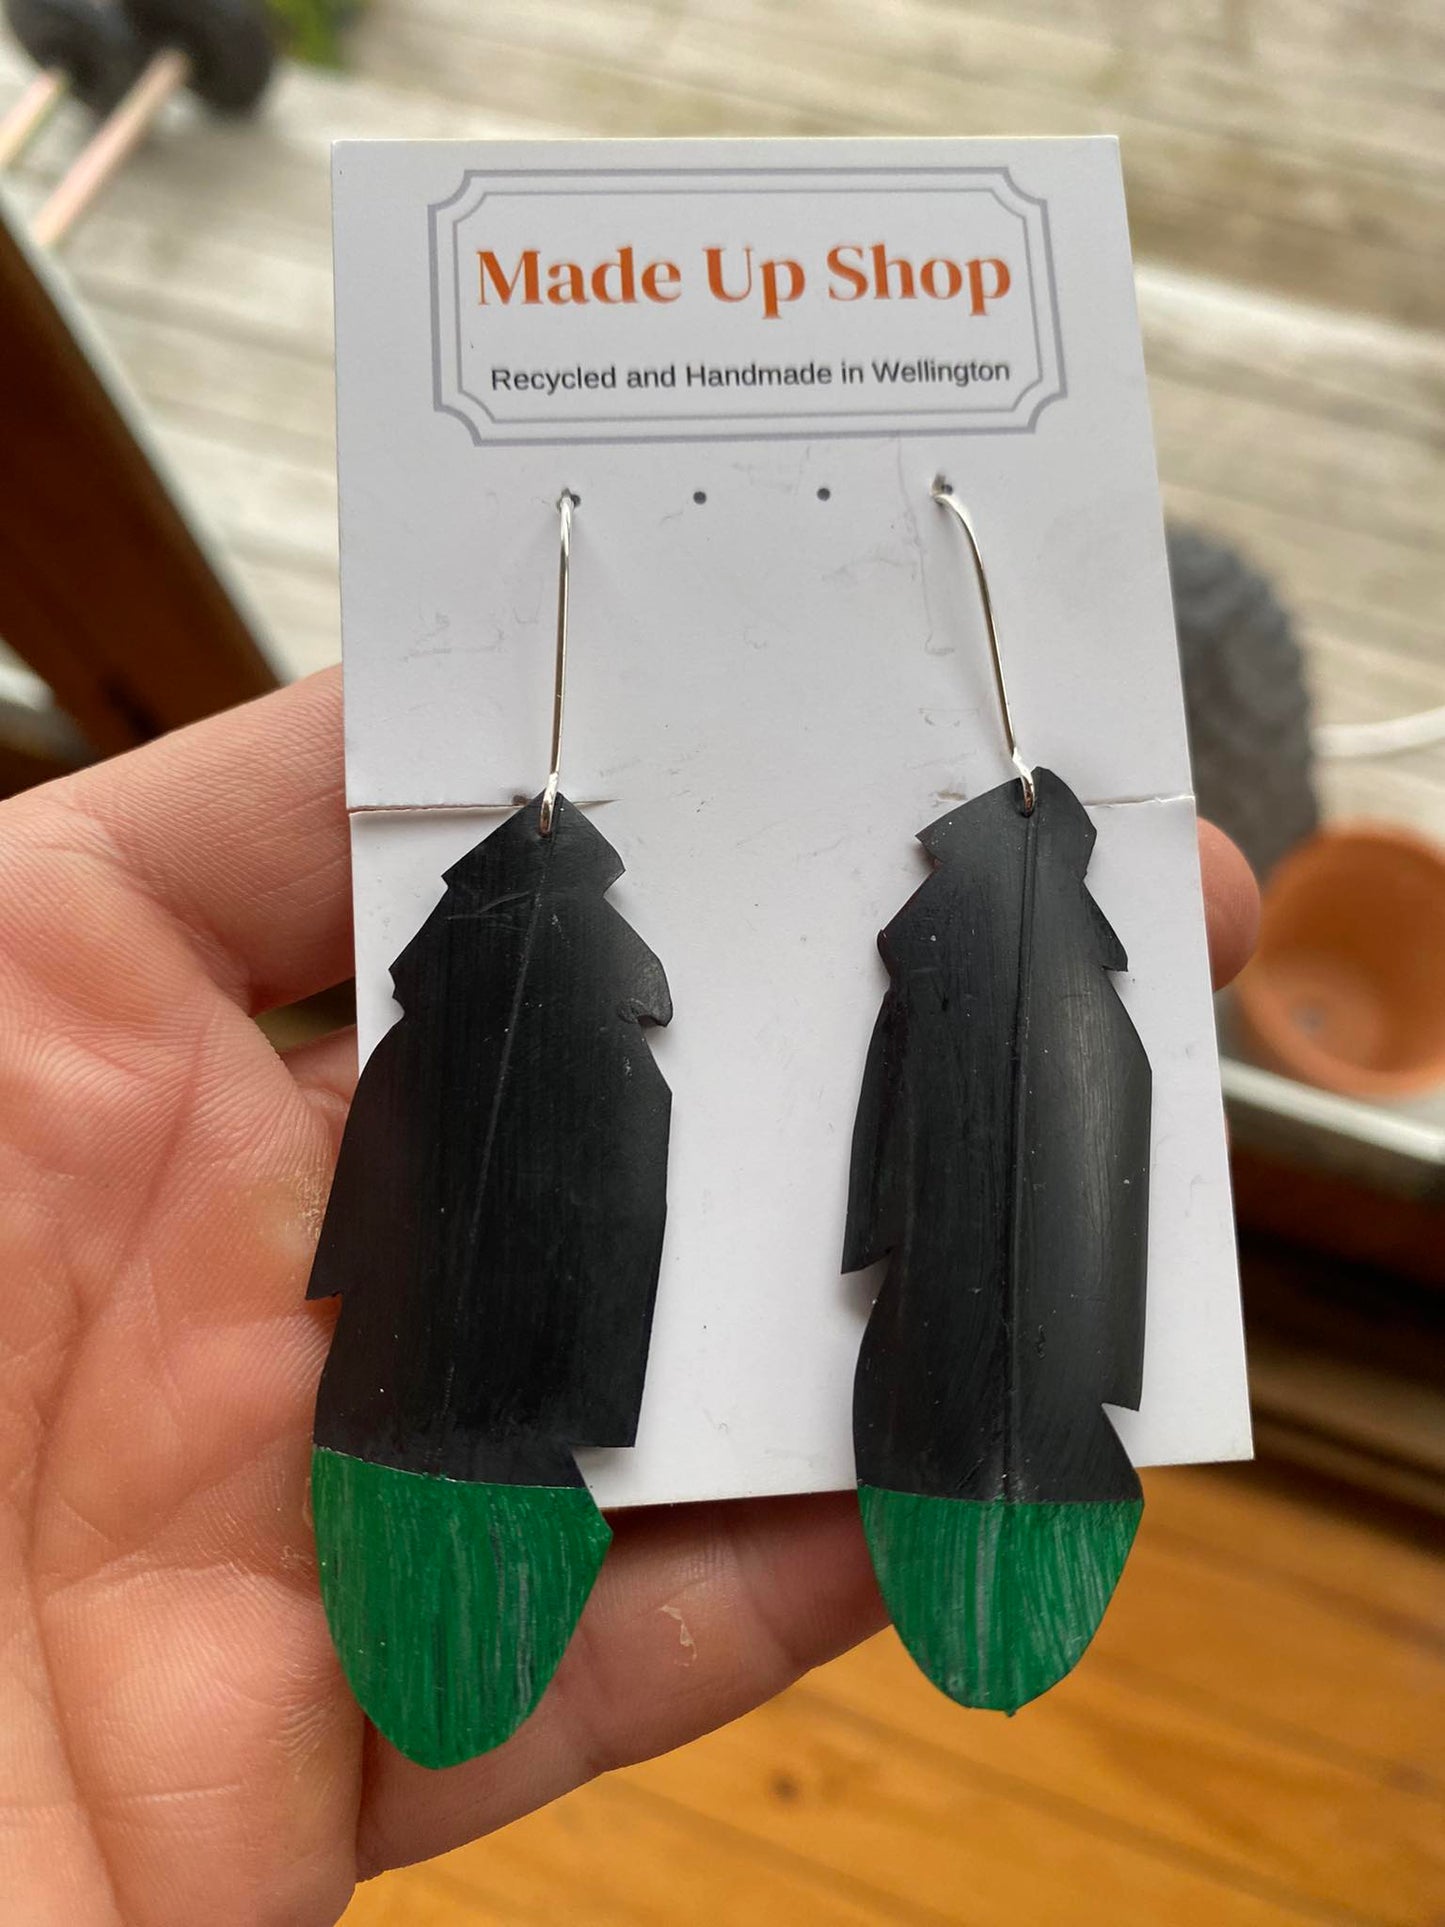 Limited edition Green Recycled bike tire earrings